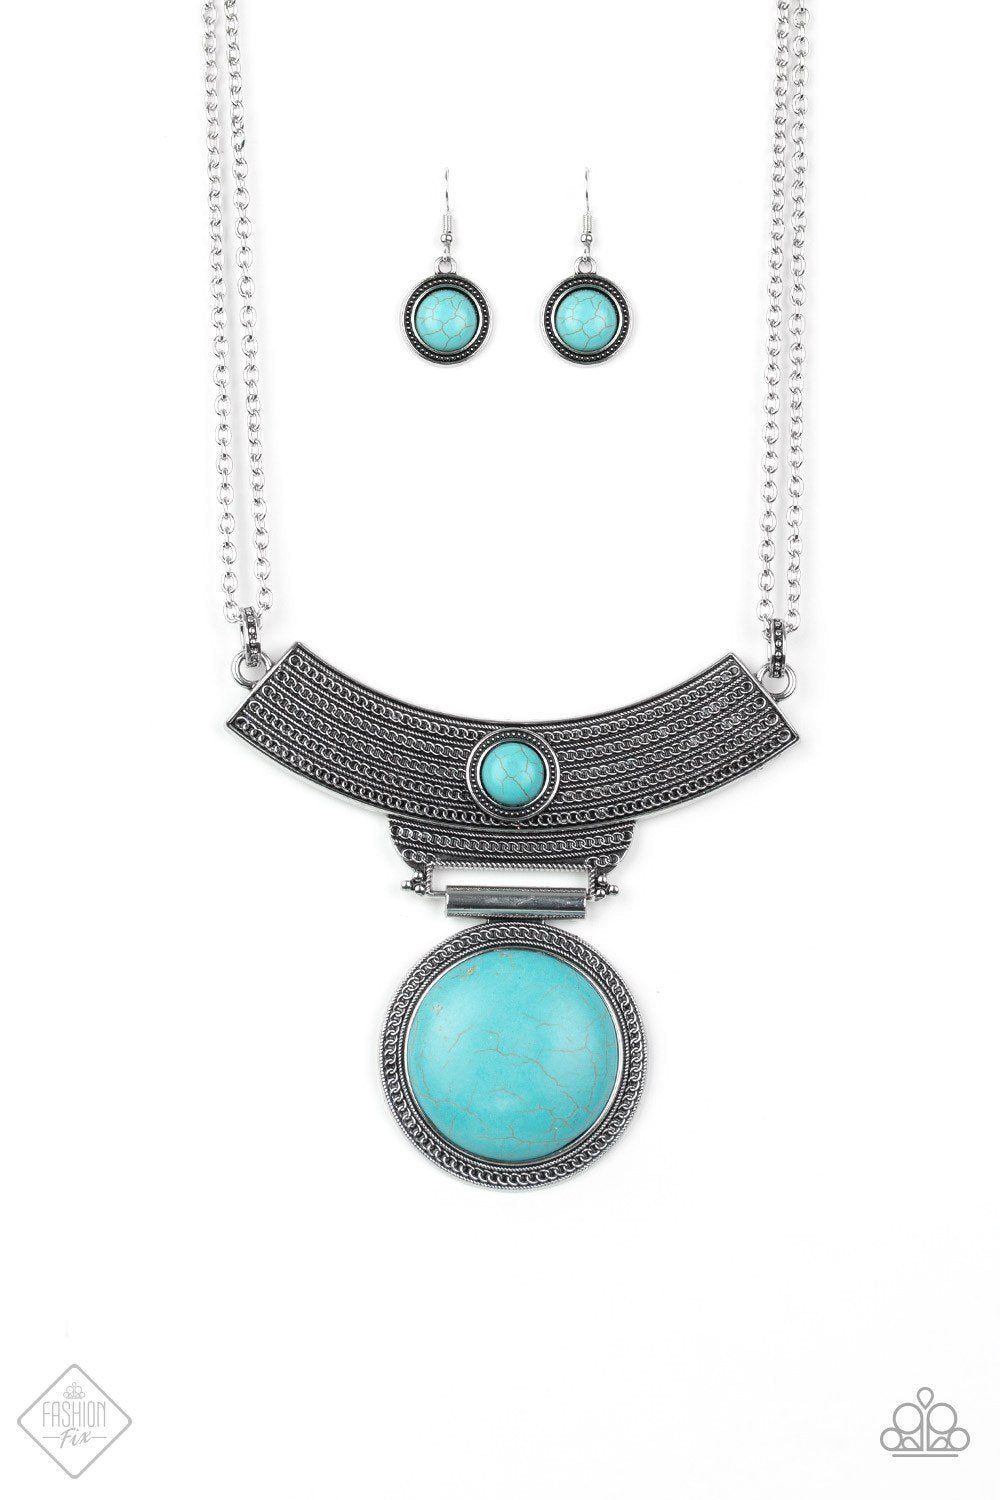 Lasting EMPRESS-ions Turquoise Blue Stone Necklace - Paparazzi Accessories-CarasShop.com - $5 Jewelry by Cara Jewels